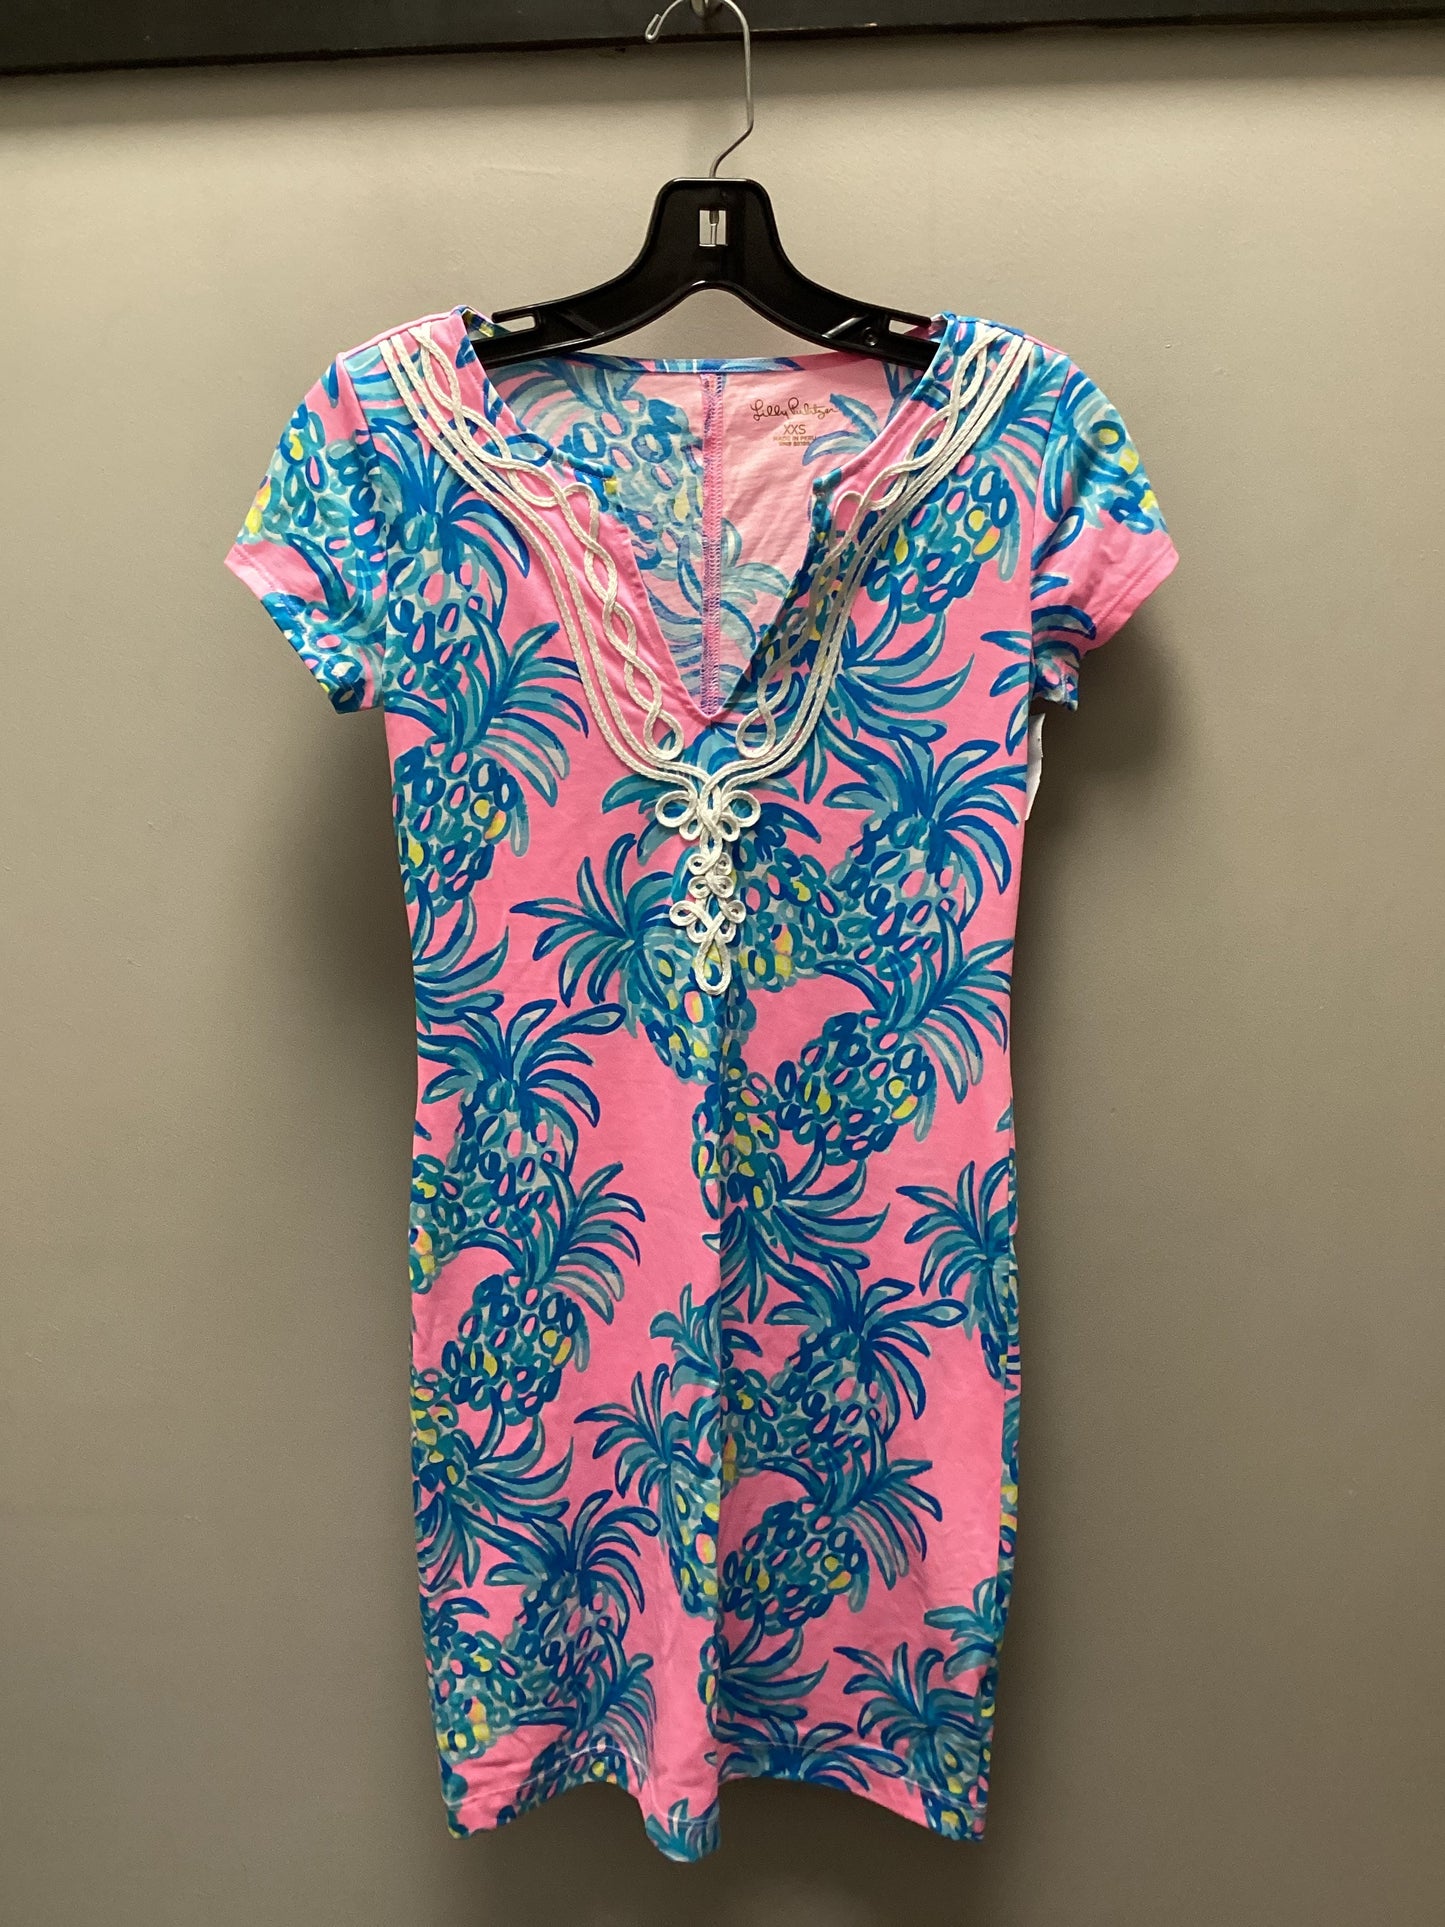 Dress Casual Short By Lilly Pulitzer  Size: Xxs